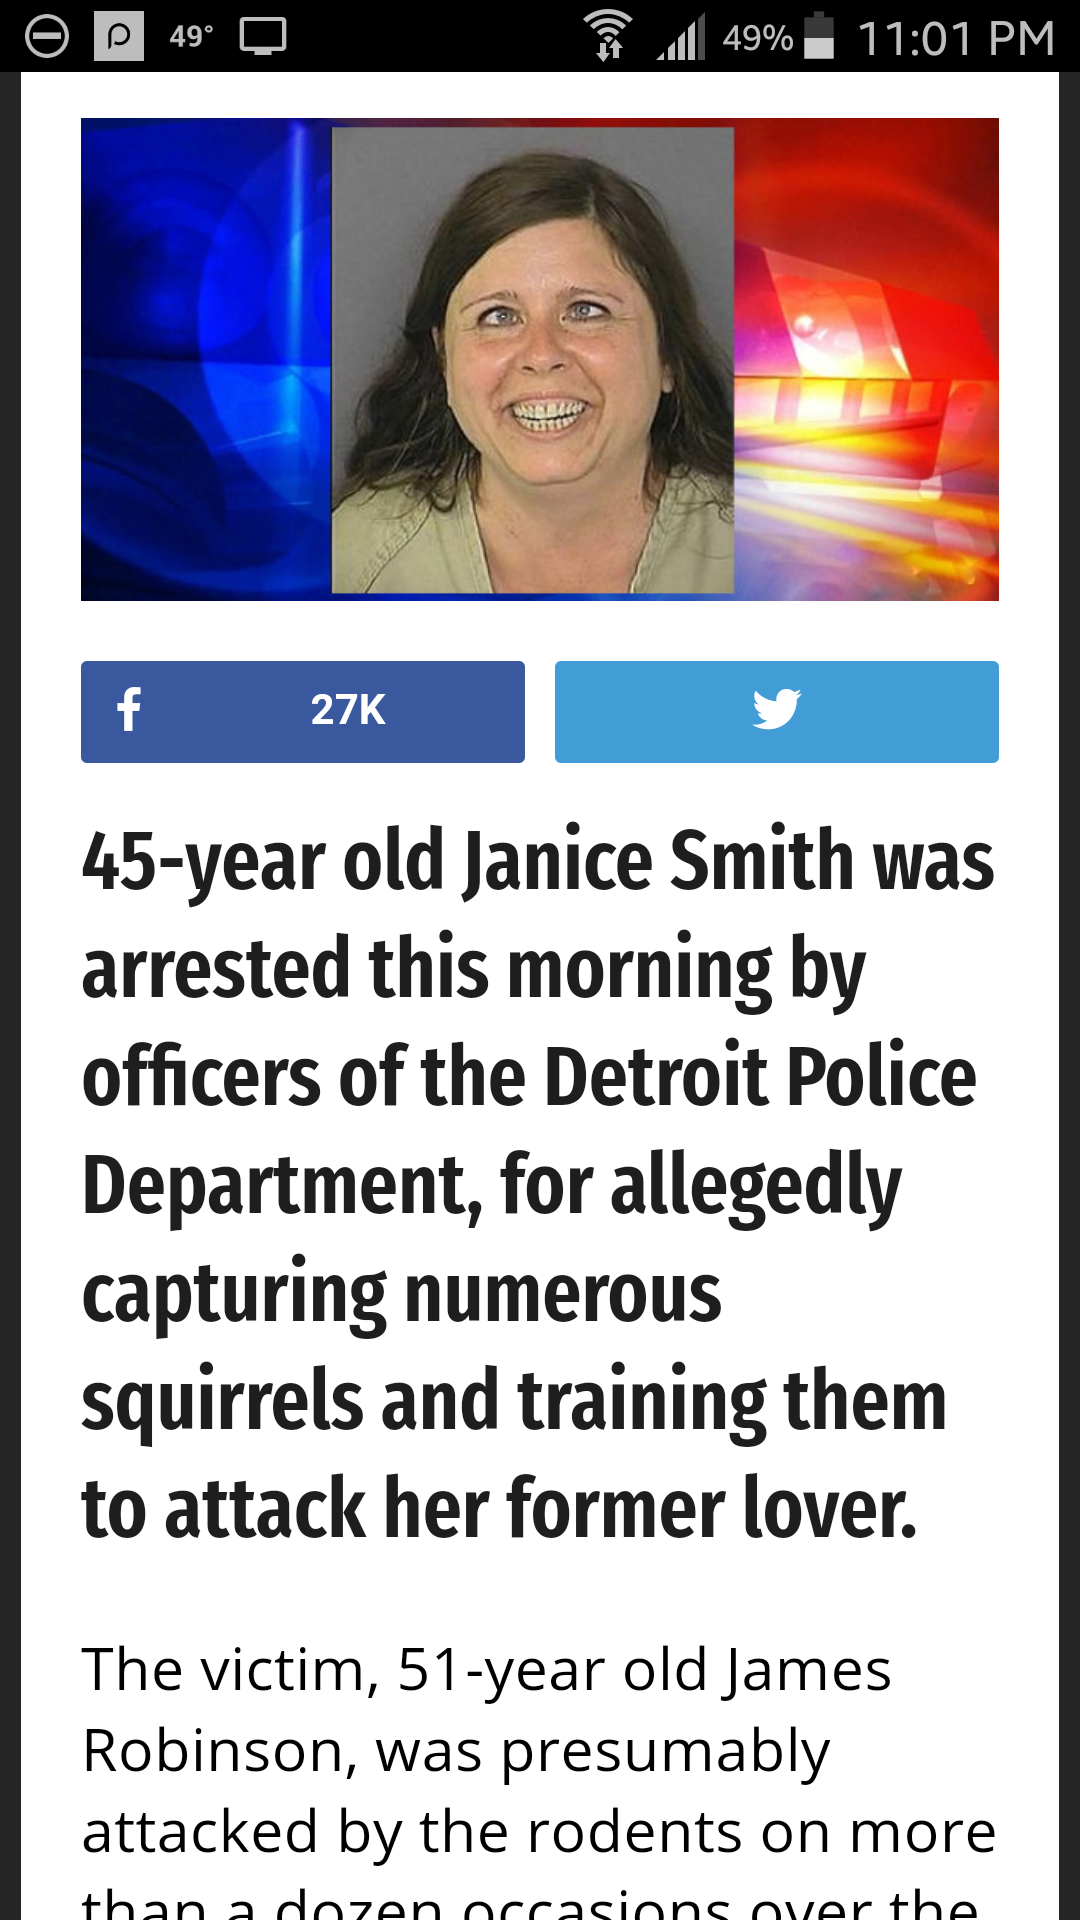 Funny looking cross-eyed woman article about her being arrested for training squirrels to attack her husband